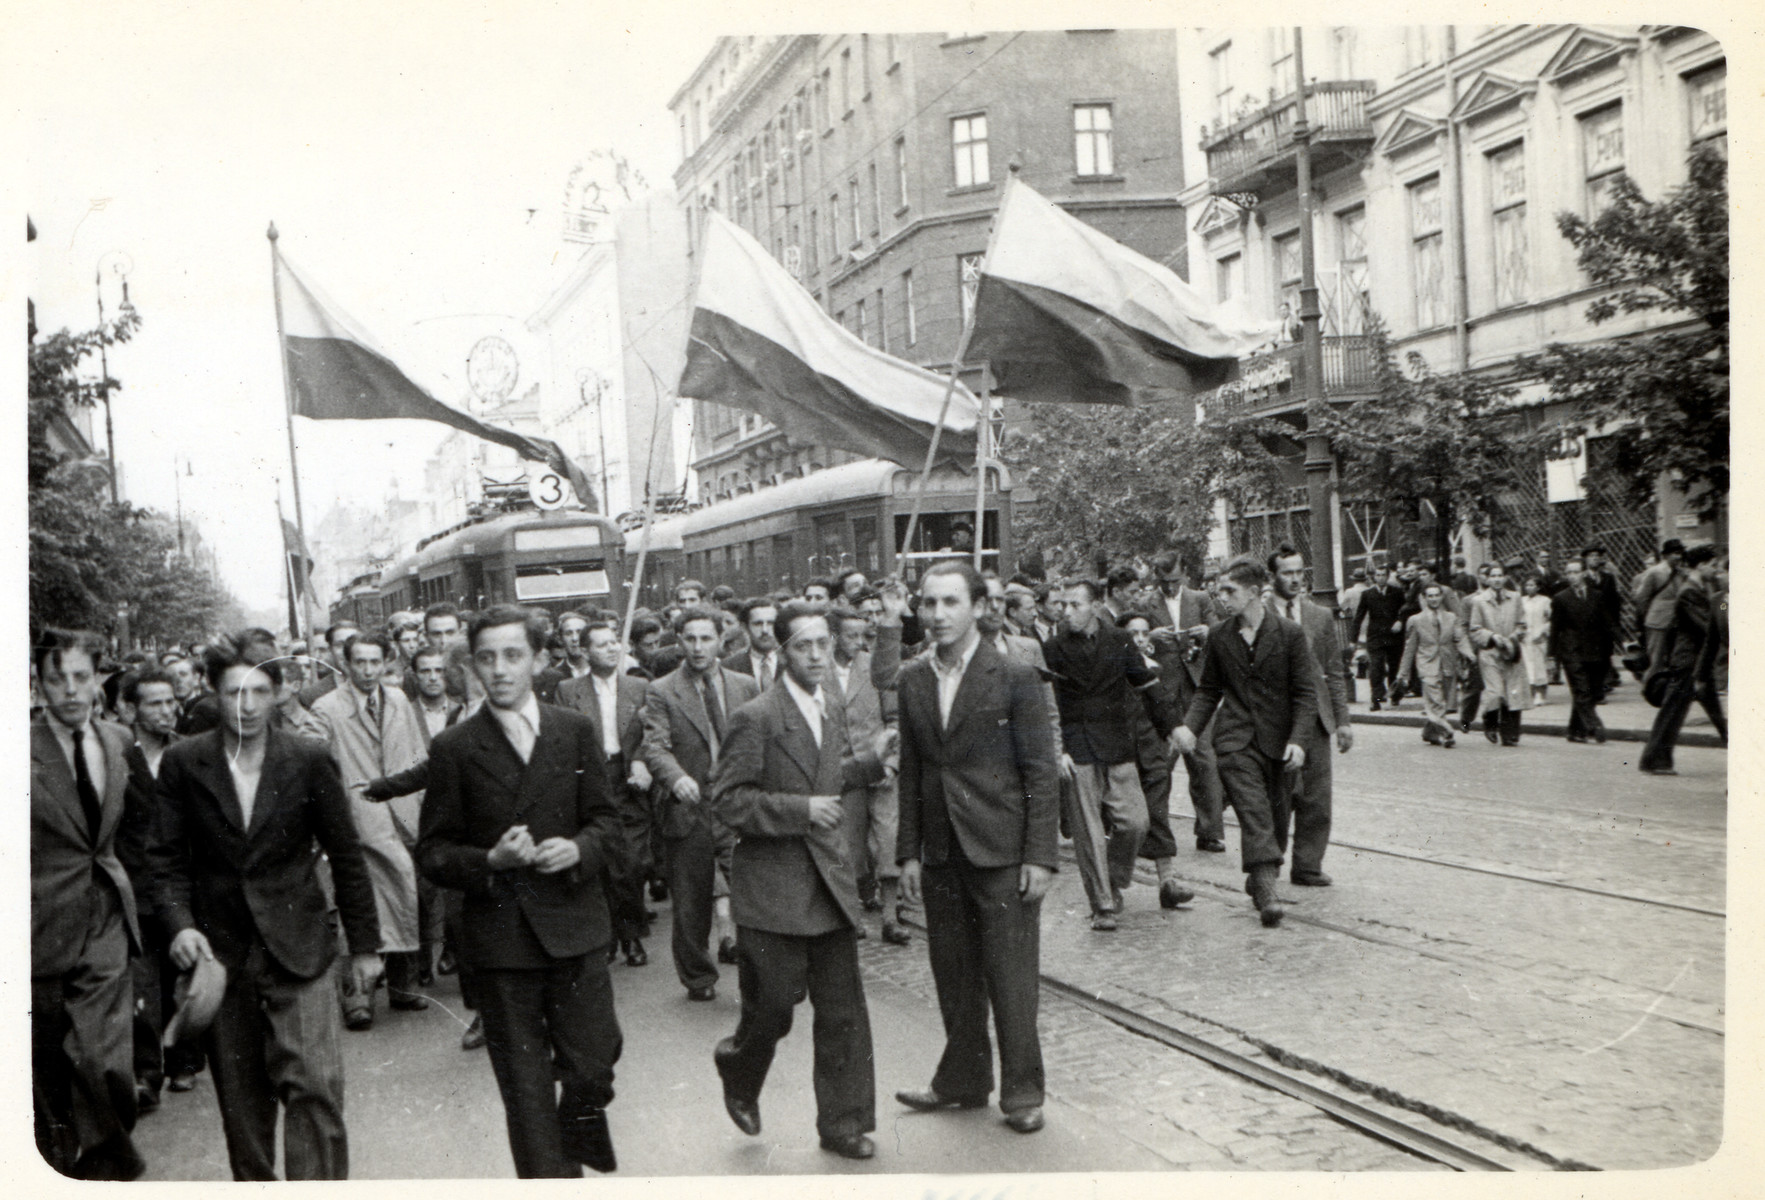 "A Moment of Confidence:" Poles celebrate in the streets at the news that England and France declared war on Germany. 

[The book "Warsaw" by Julien Bryan states that this photograph was taken on September 3, 1939 but Mr. Bryan himself did not arrive in Warsaw until the 7th of that month. This information does not match up, thus the tentative date.]